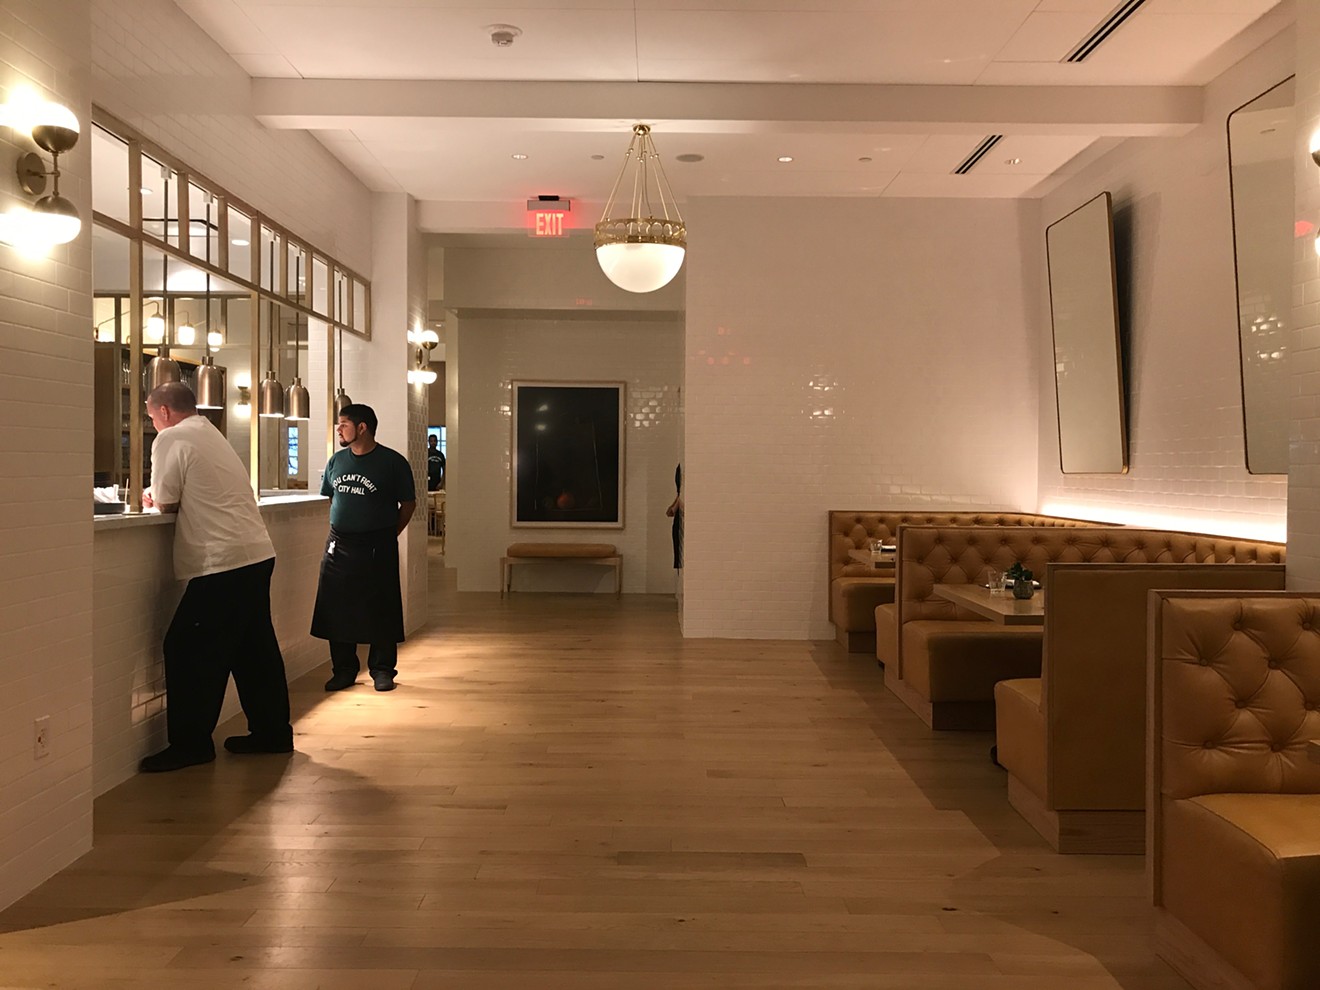 The new City Hall Bistro at the Adolphus has an open kitchen and several dining areas.